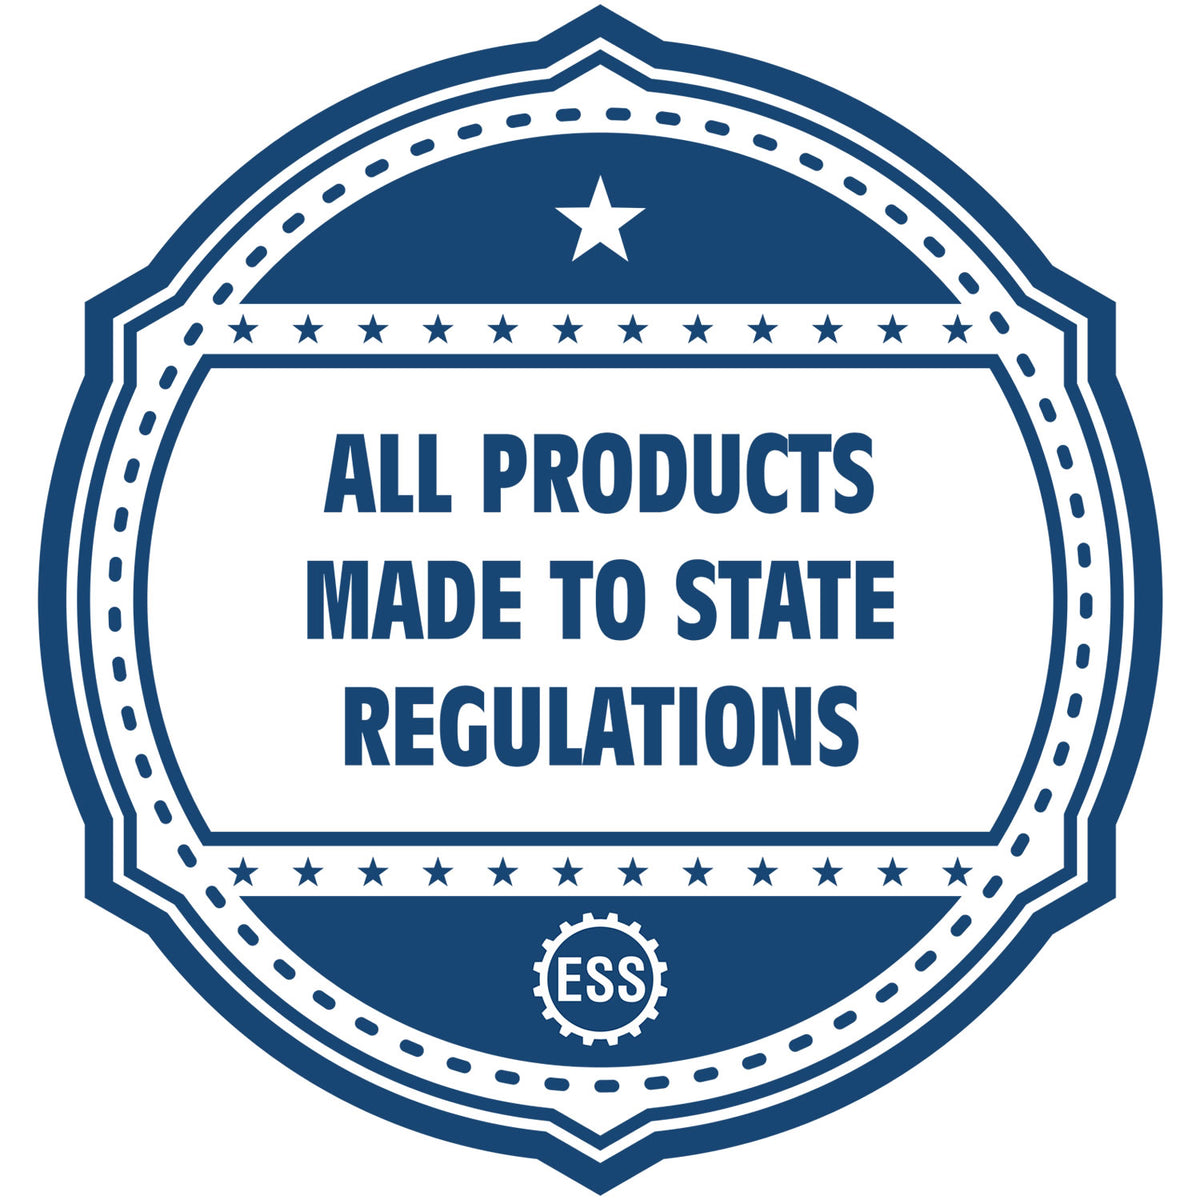 An icon or badge element for the Heavy Duty Cast Iron West Virginia Engineer Seal Embosser showing that this product is made in compliance with state regulations.